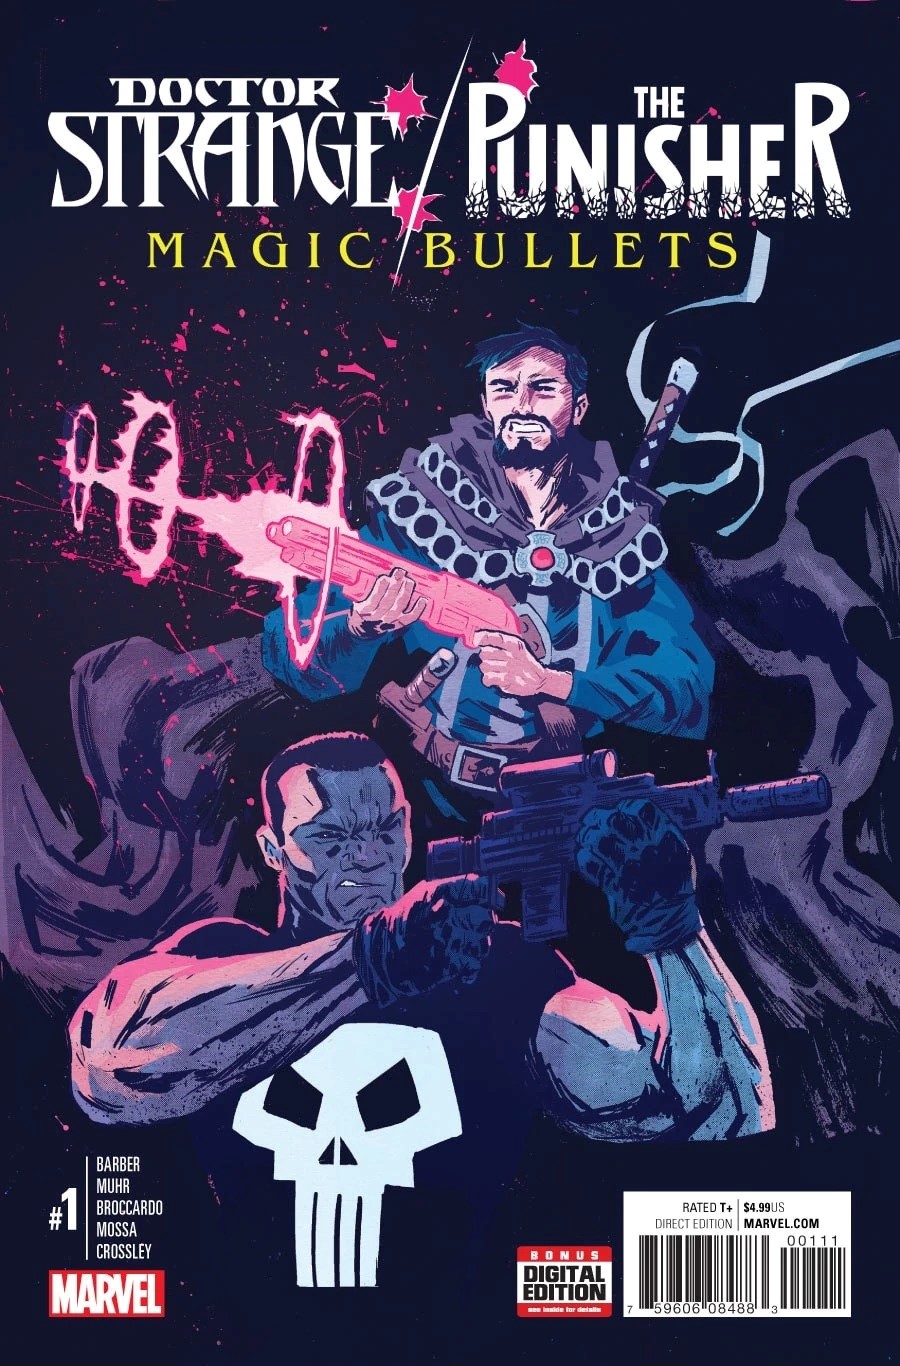 Doctor Strange/The Punisher: Magic Bullets Limited Series Bundle Issues 1-4